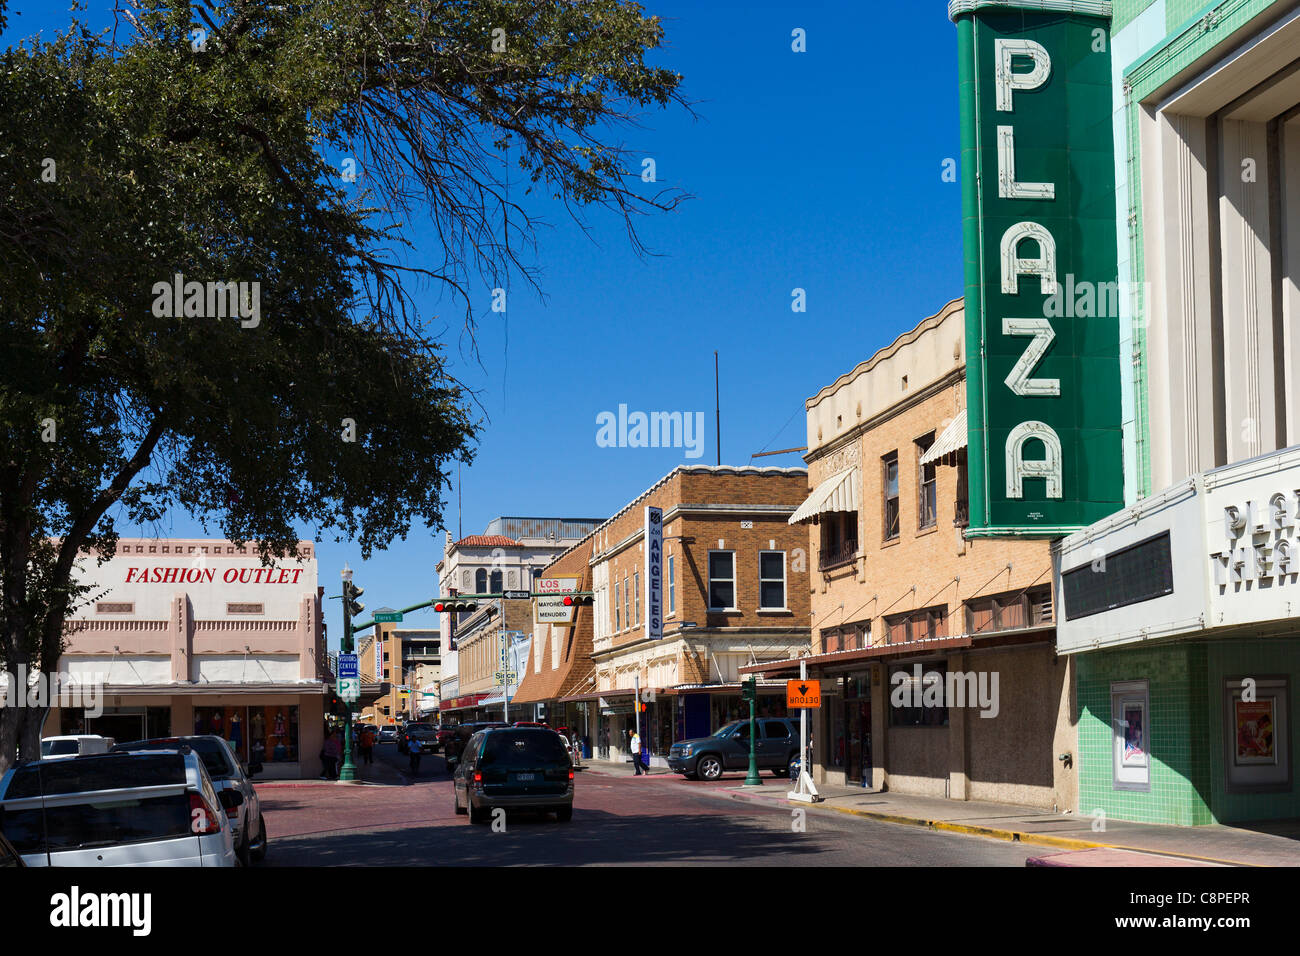 Laredo texas hi-res stock photography and images - Alamy